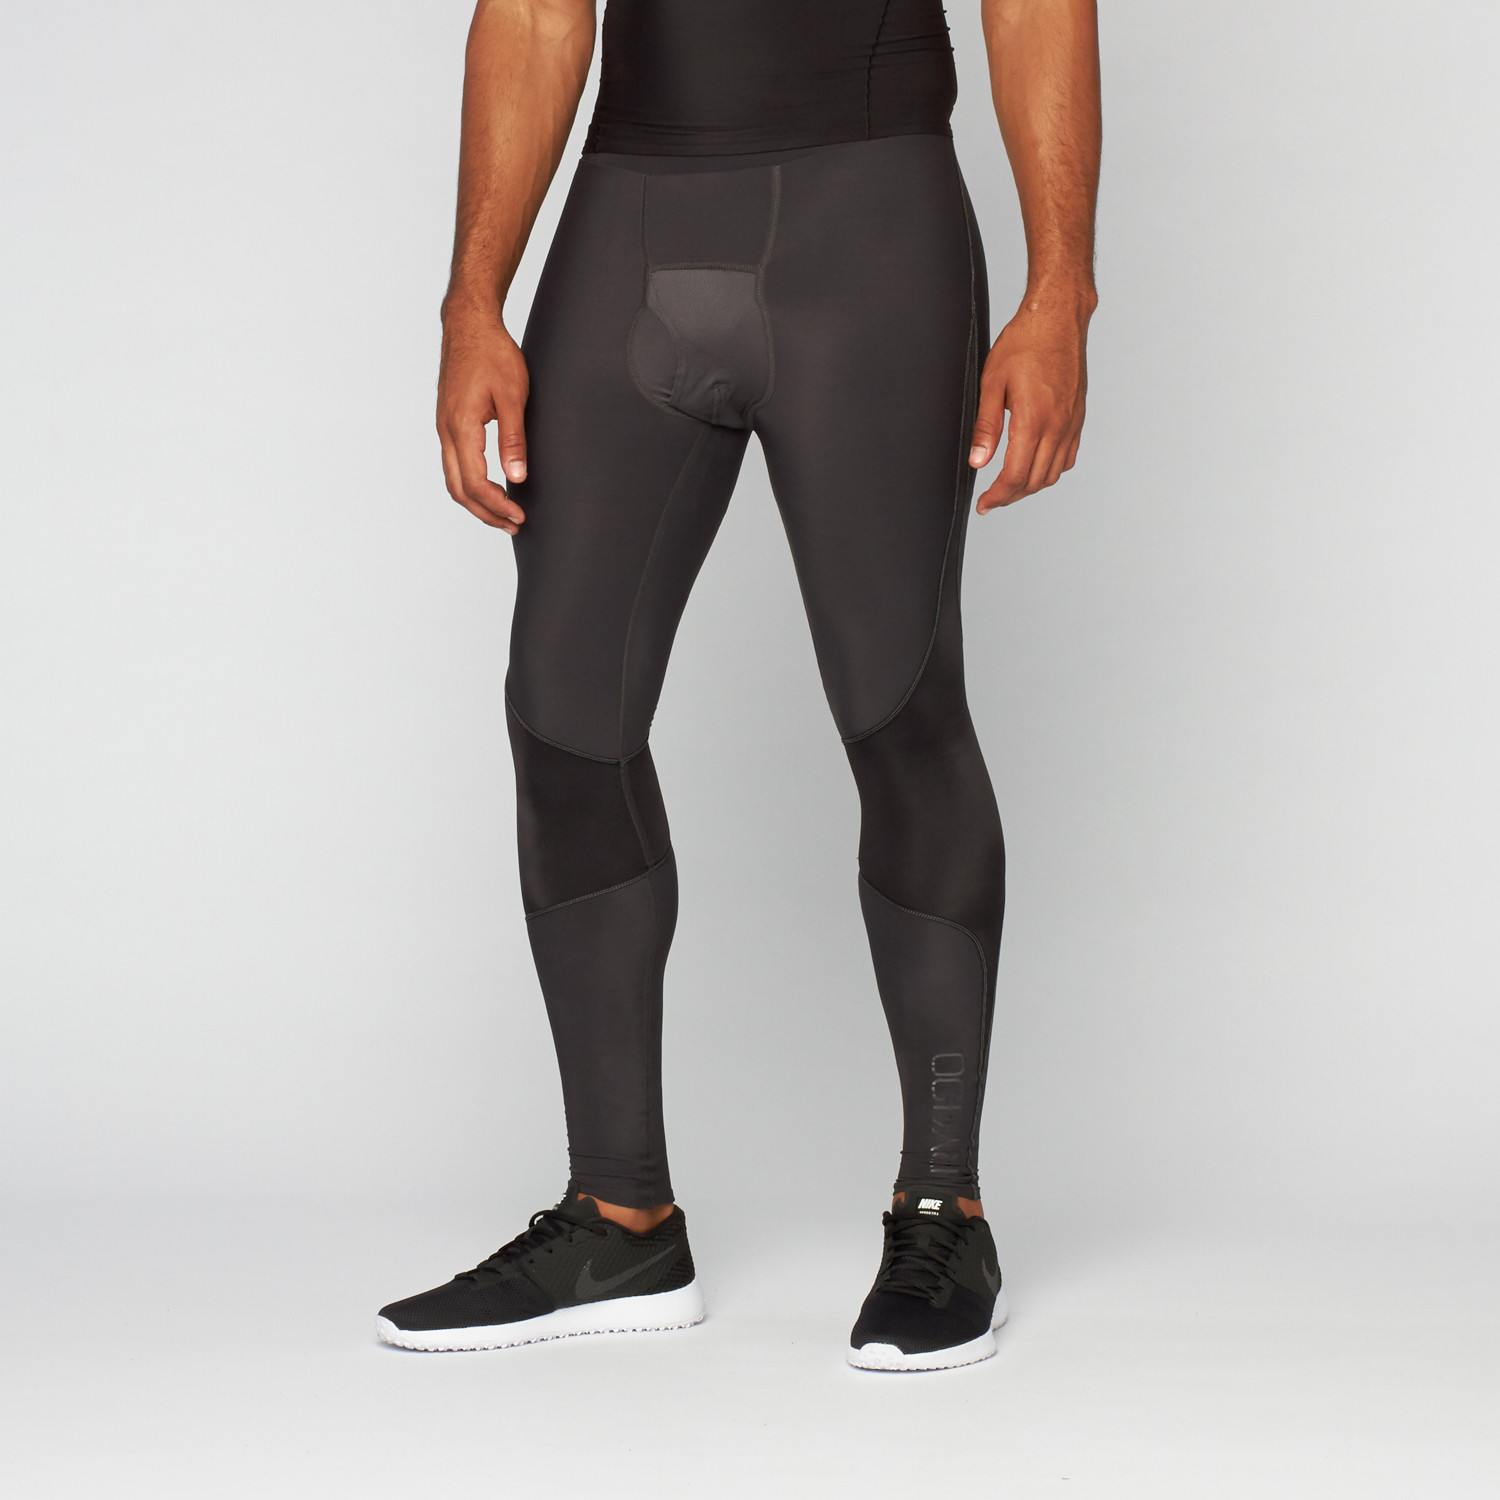 RY400 Long Compression Tights // Graphite (XS) - SKINS - Touch of